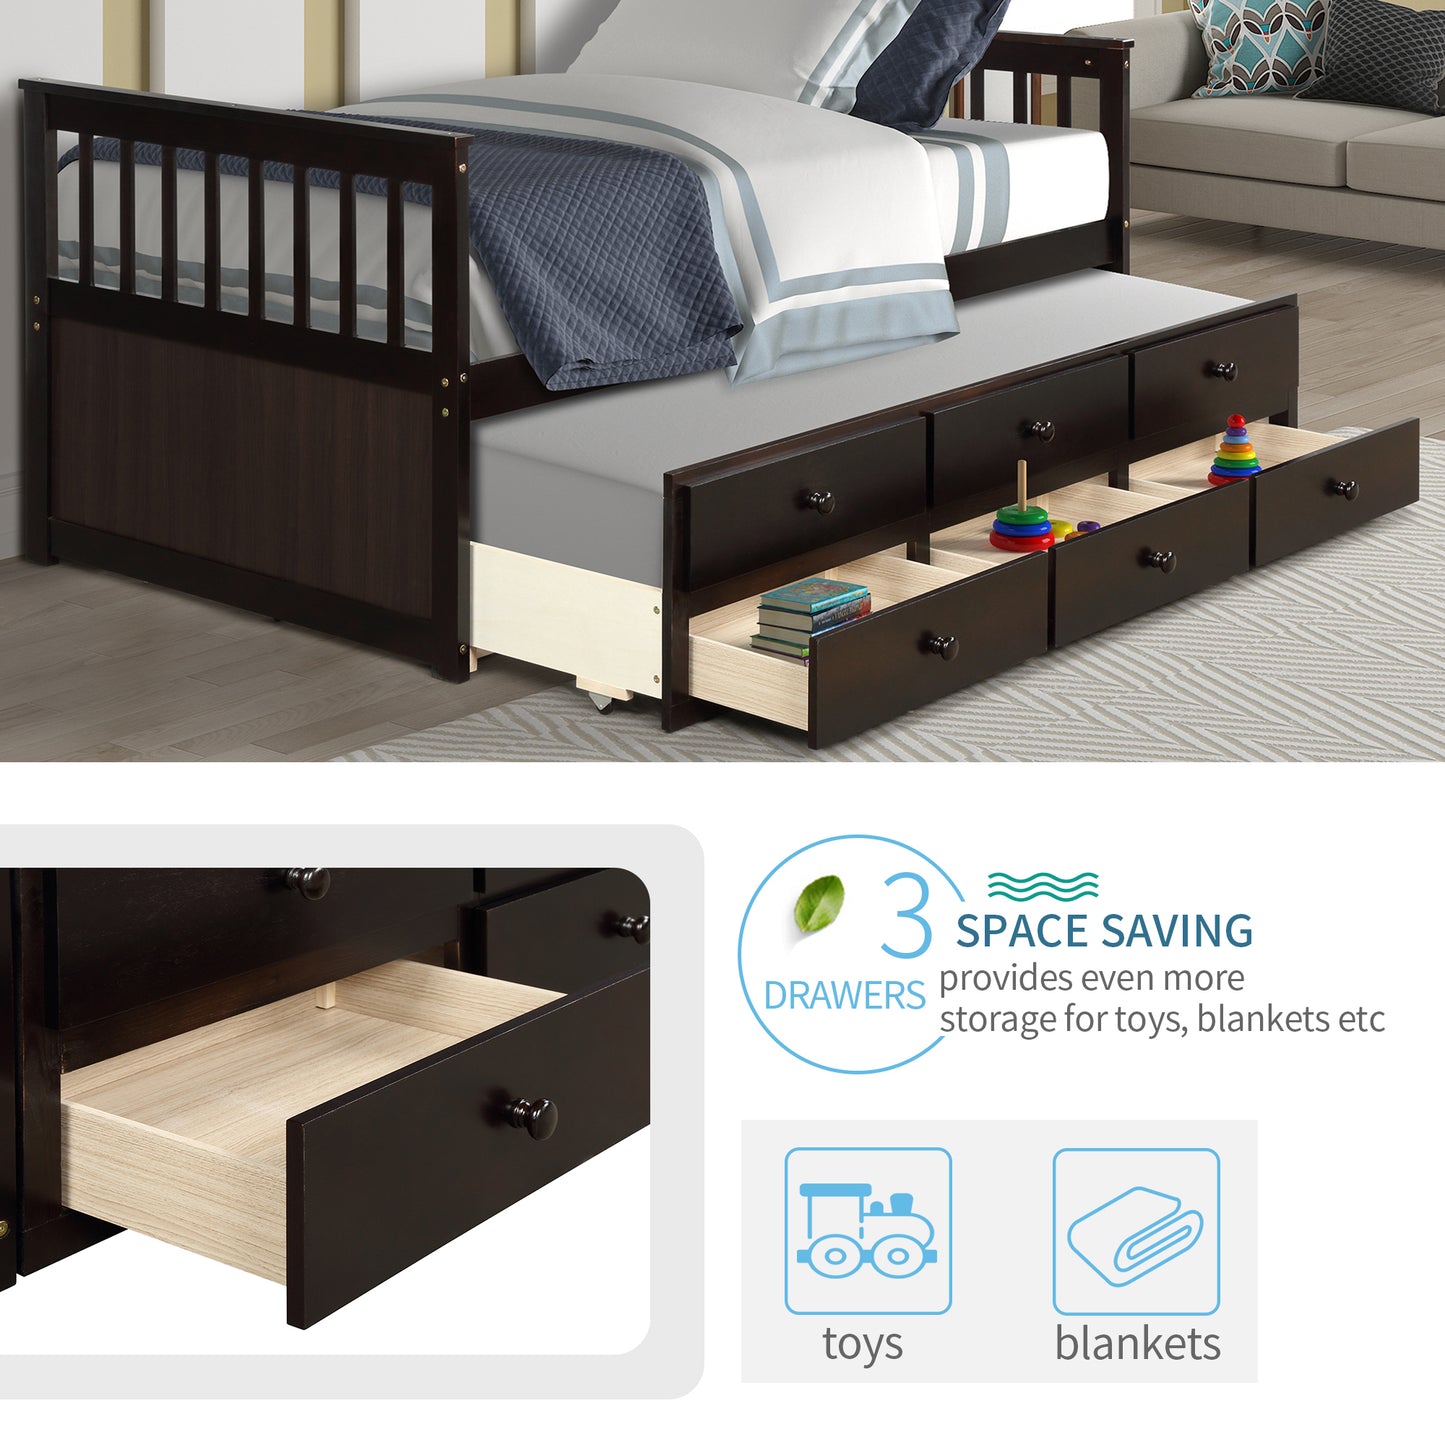 TOPMAX Captain's Bed Twin Daybed with Trundle Bed and Storage Drawers, Espresso